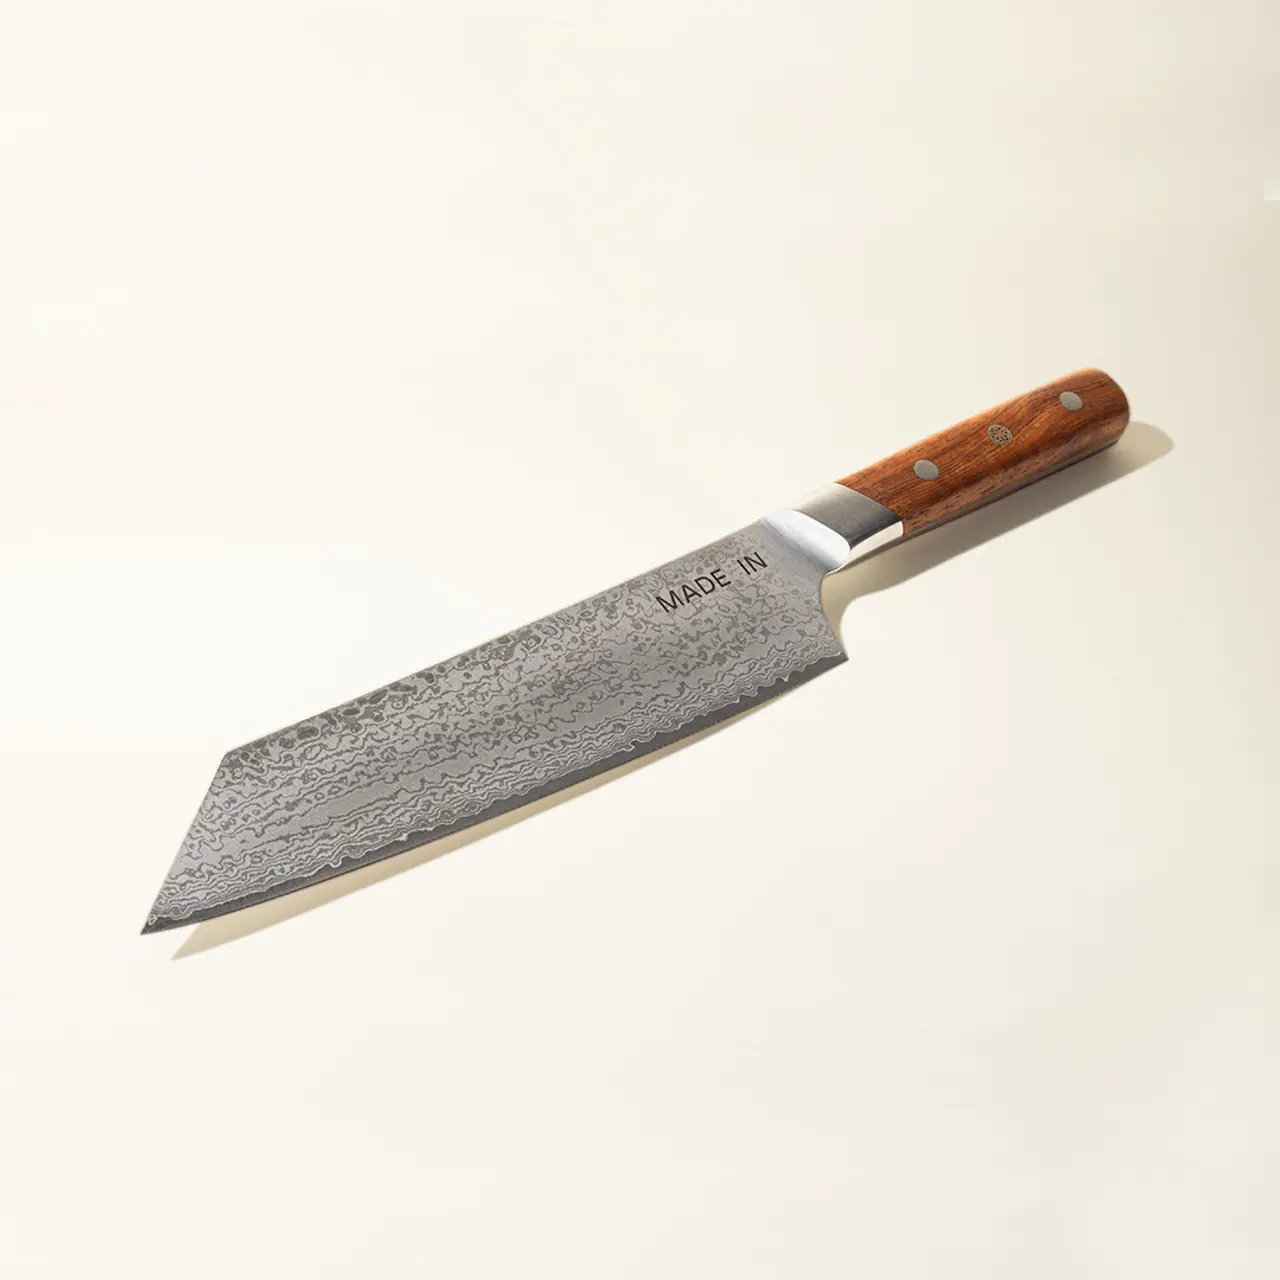 A finely crafted chef's knife with a damascus pattern blade and a wooden handle rests against a light background.